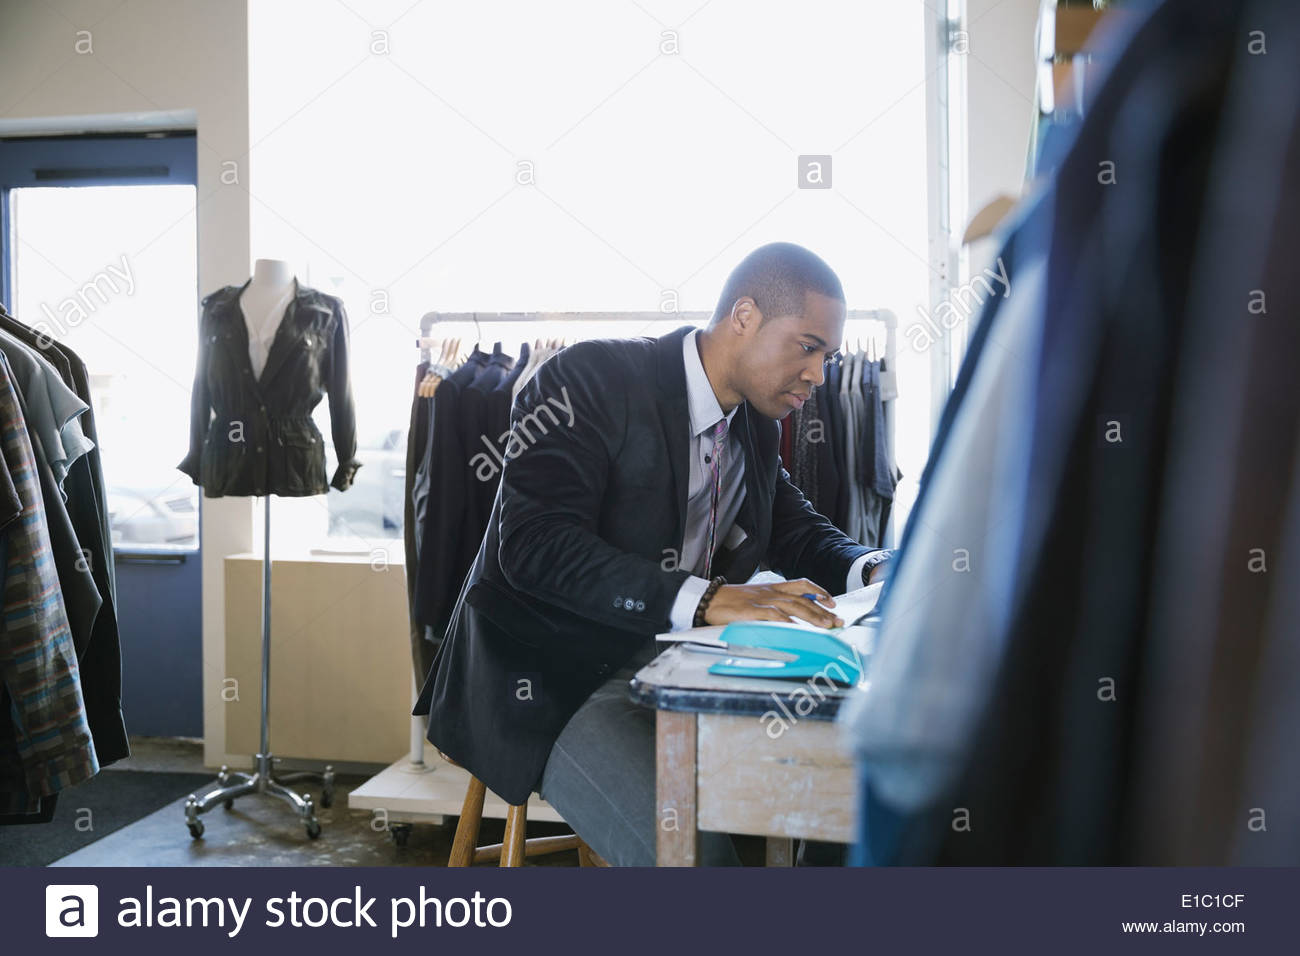 Business owner working in clothing shop Stock Photo